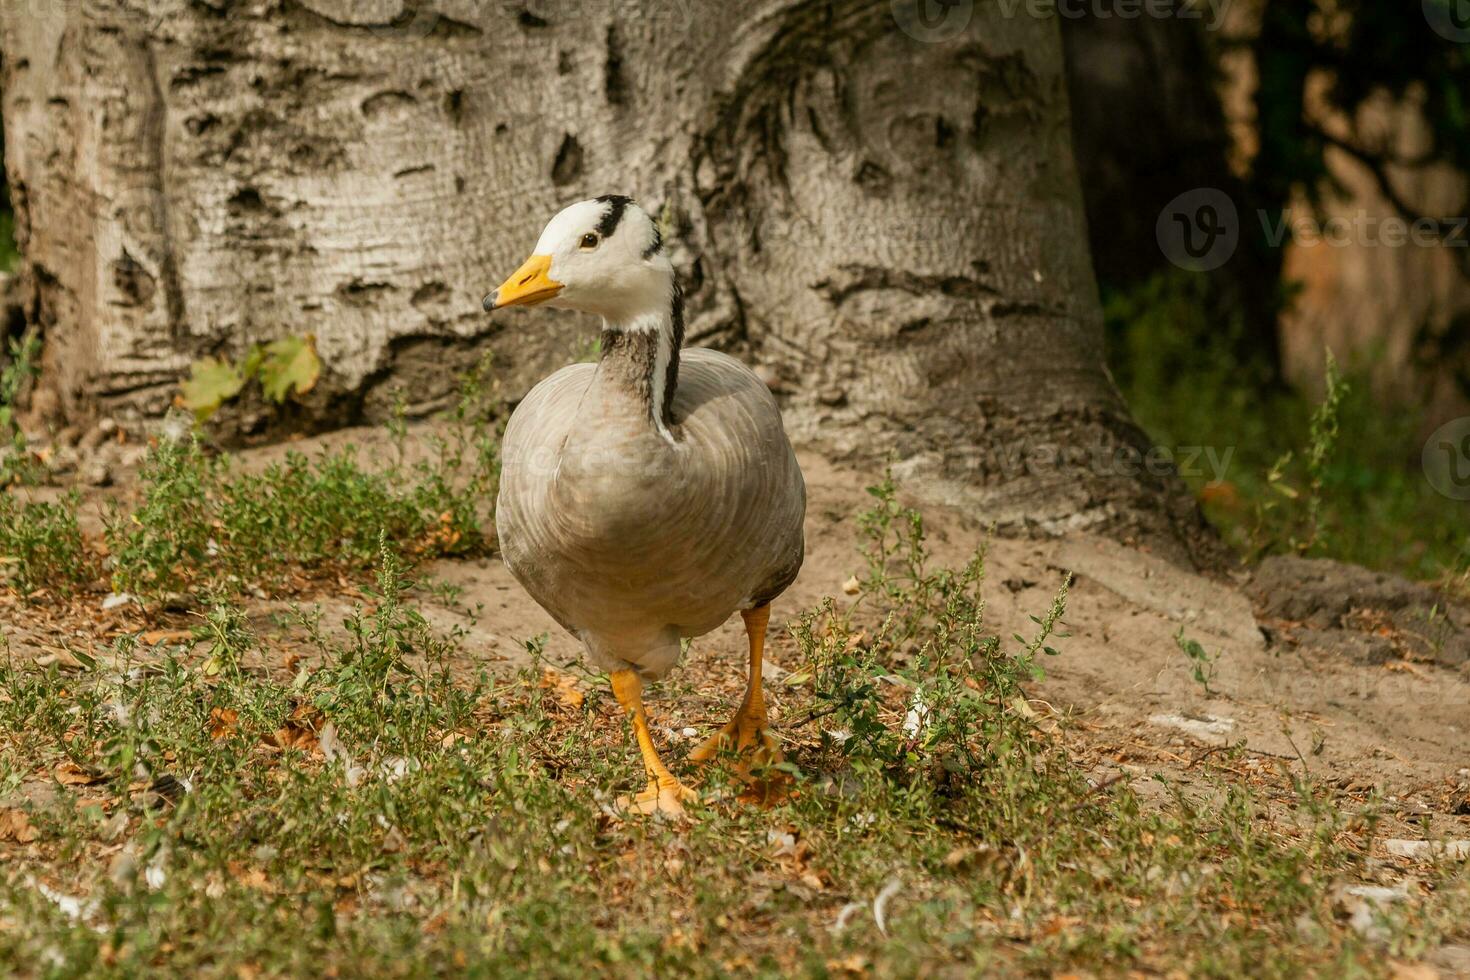 A gray goose walks on the grass photo